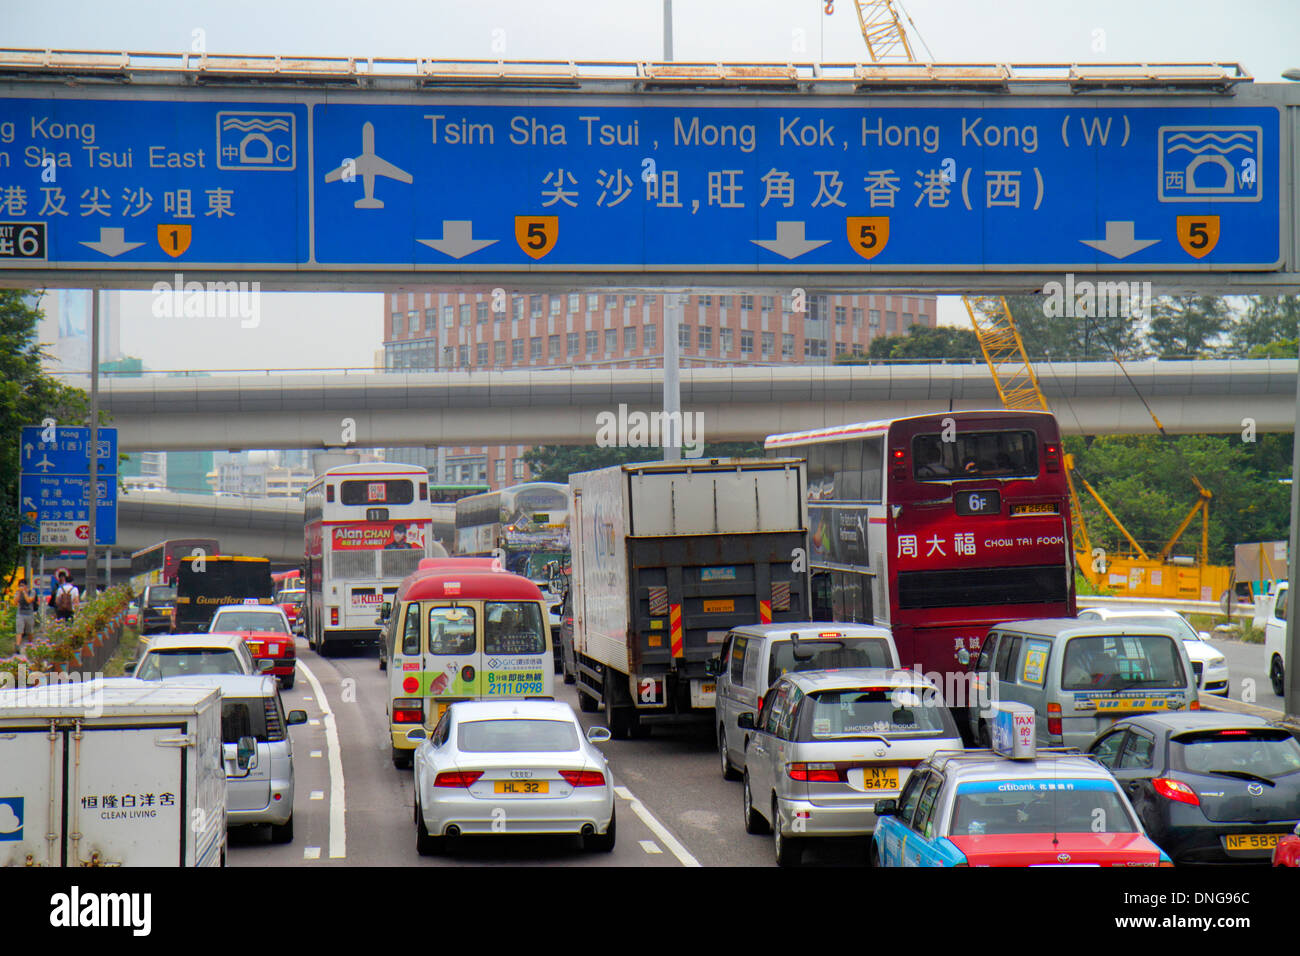 Hong Kong China,HK,Asia,Chinese,Oriental,Kowloon,East Kowloon Corridor,highway,traffic,cars,bus,coach,sign,directions,Cantonese Chinese characters hàn Stock Photo